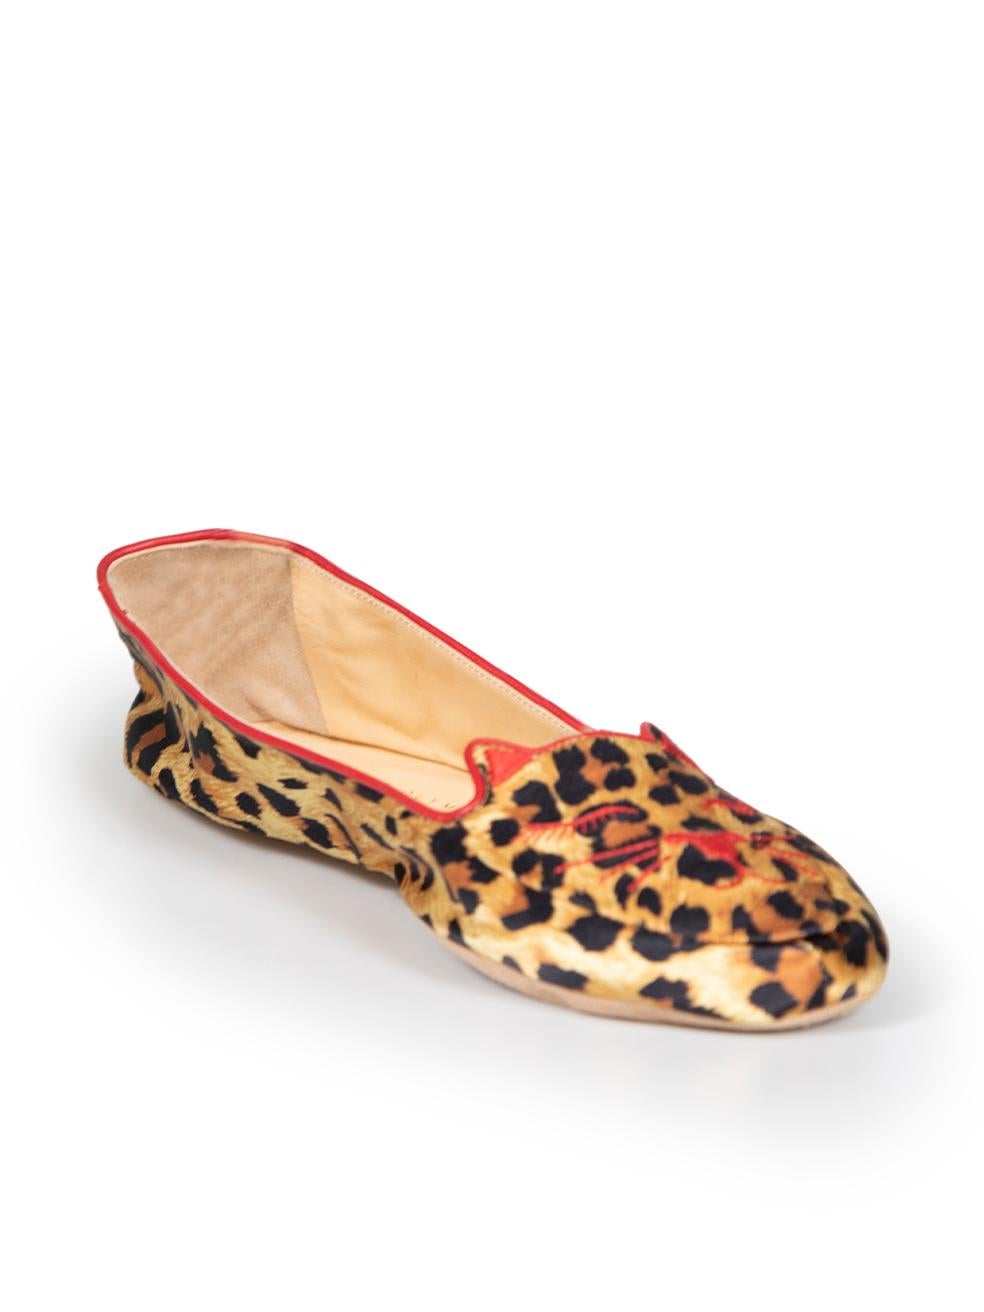 CONDITION is Never worn. No visible wear to flats is evident on this new Charlotte Olympia X Agent Provocateur designer resale item. However, there's sticker stains to both of the bottom suede sole.
 
 
 
 Details
 
 
 Charlotte Olympia x Agent